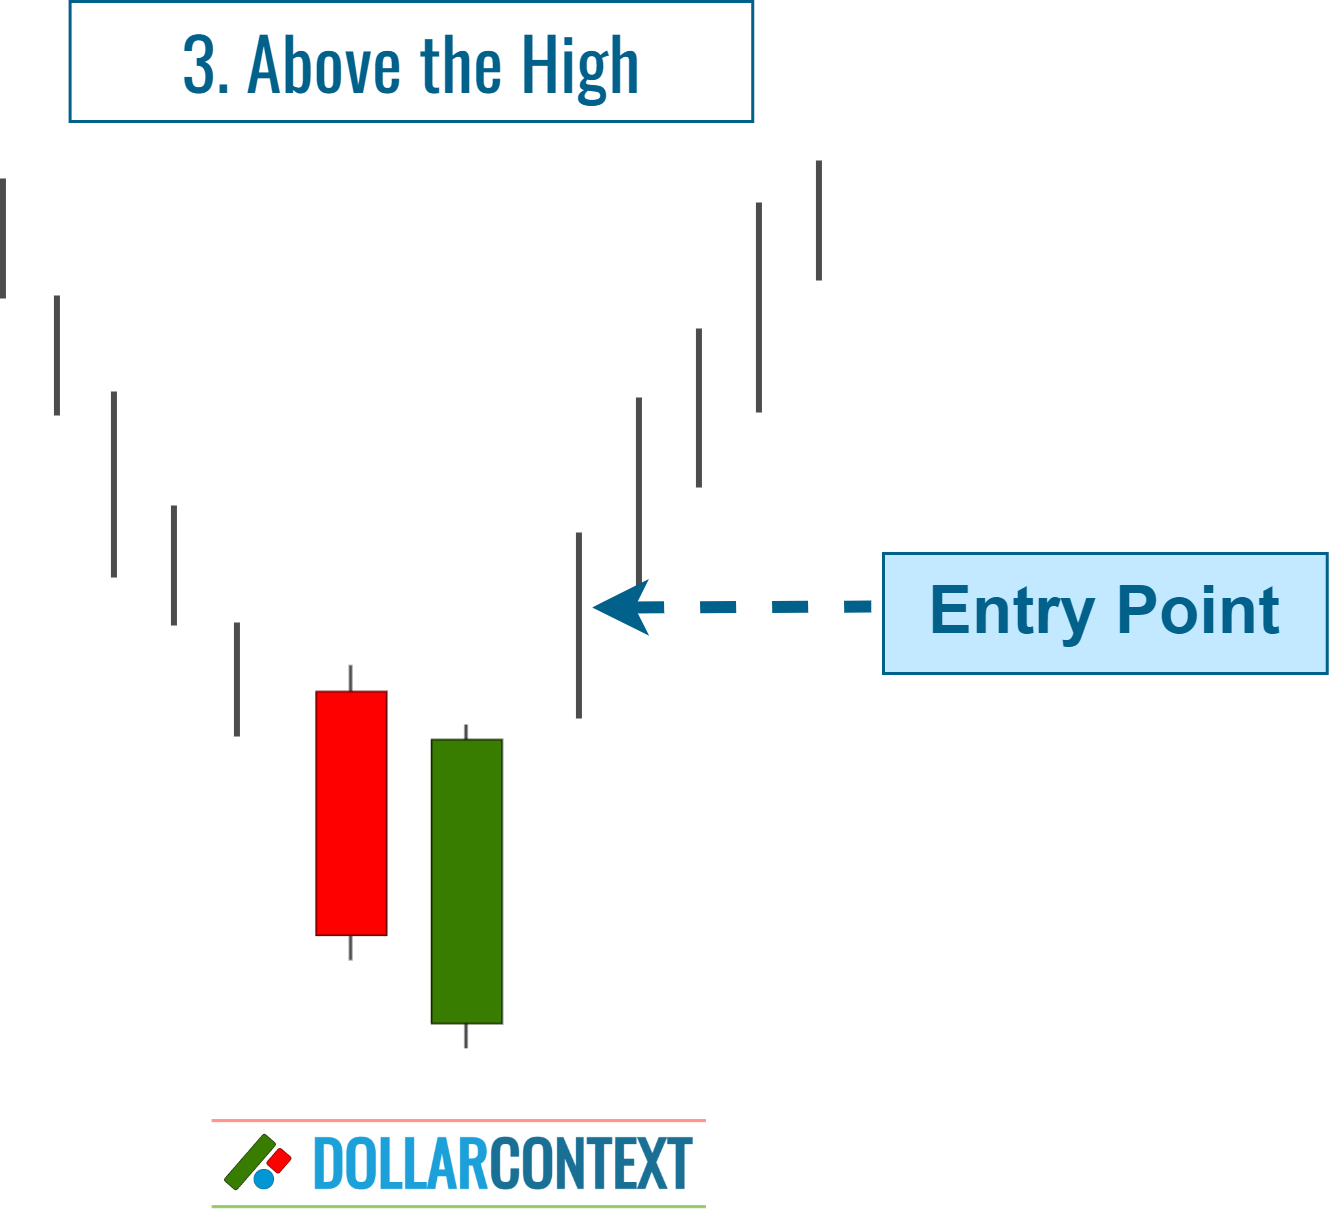 Piercing Pattern: Entering When the Price Moves Above the High of the Second Candlestick